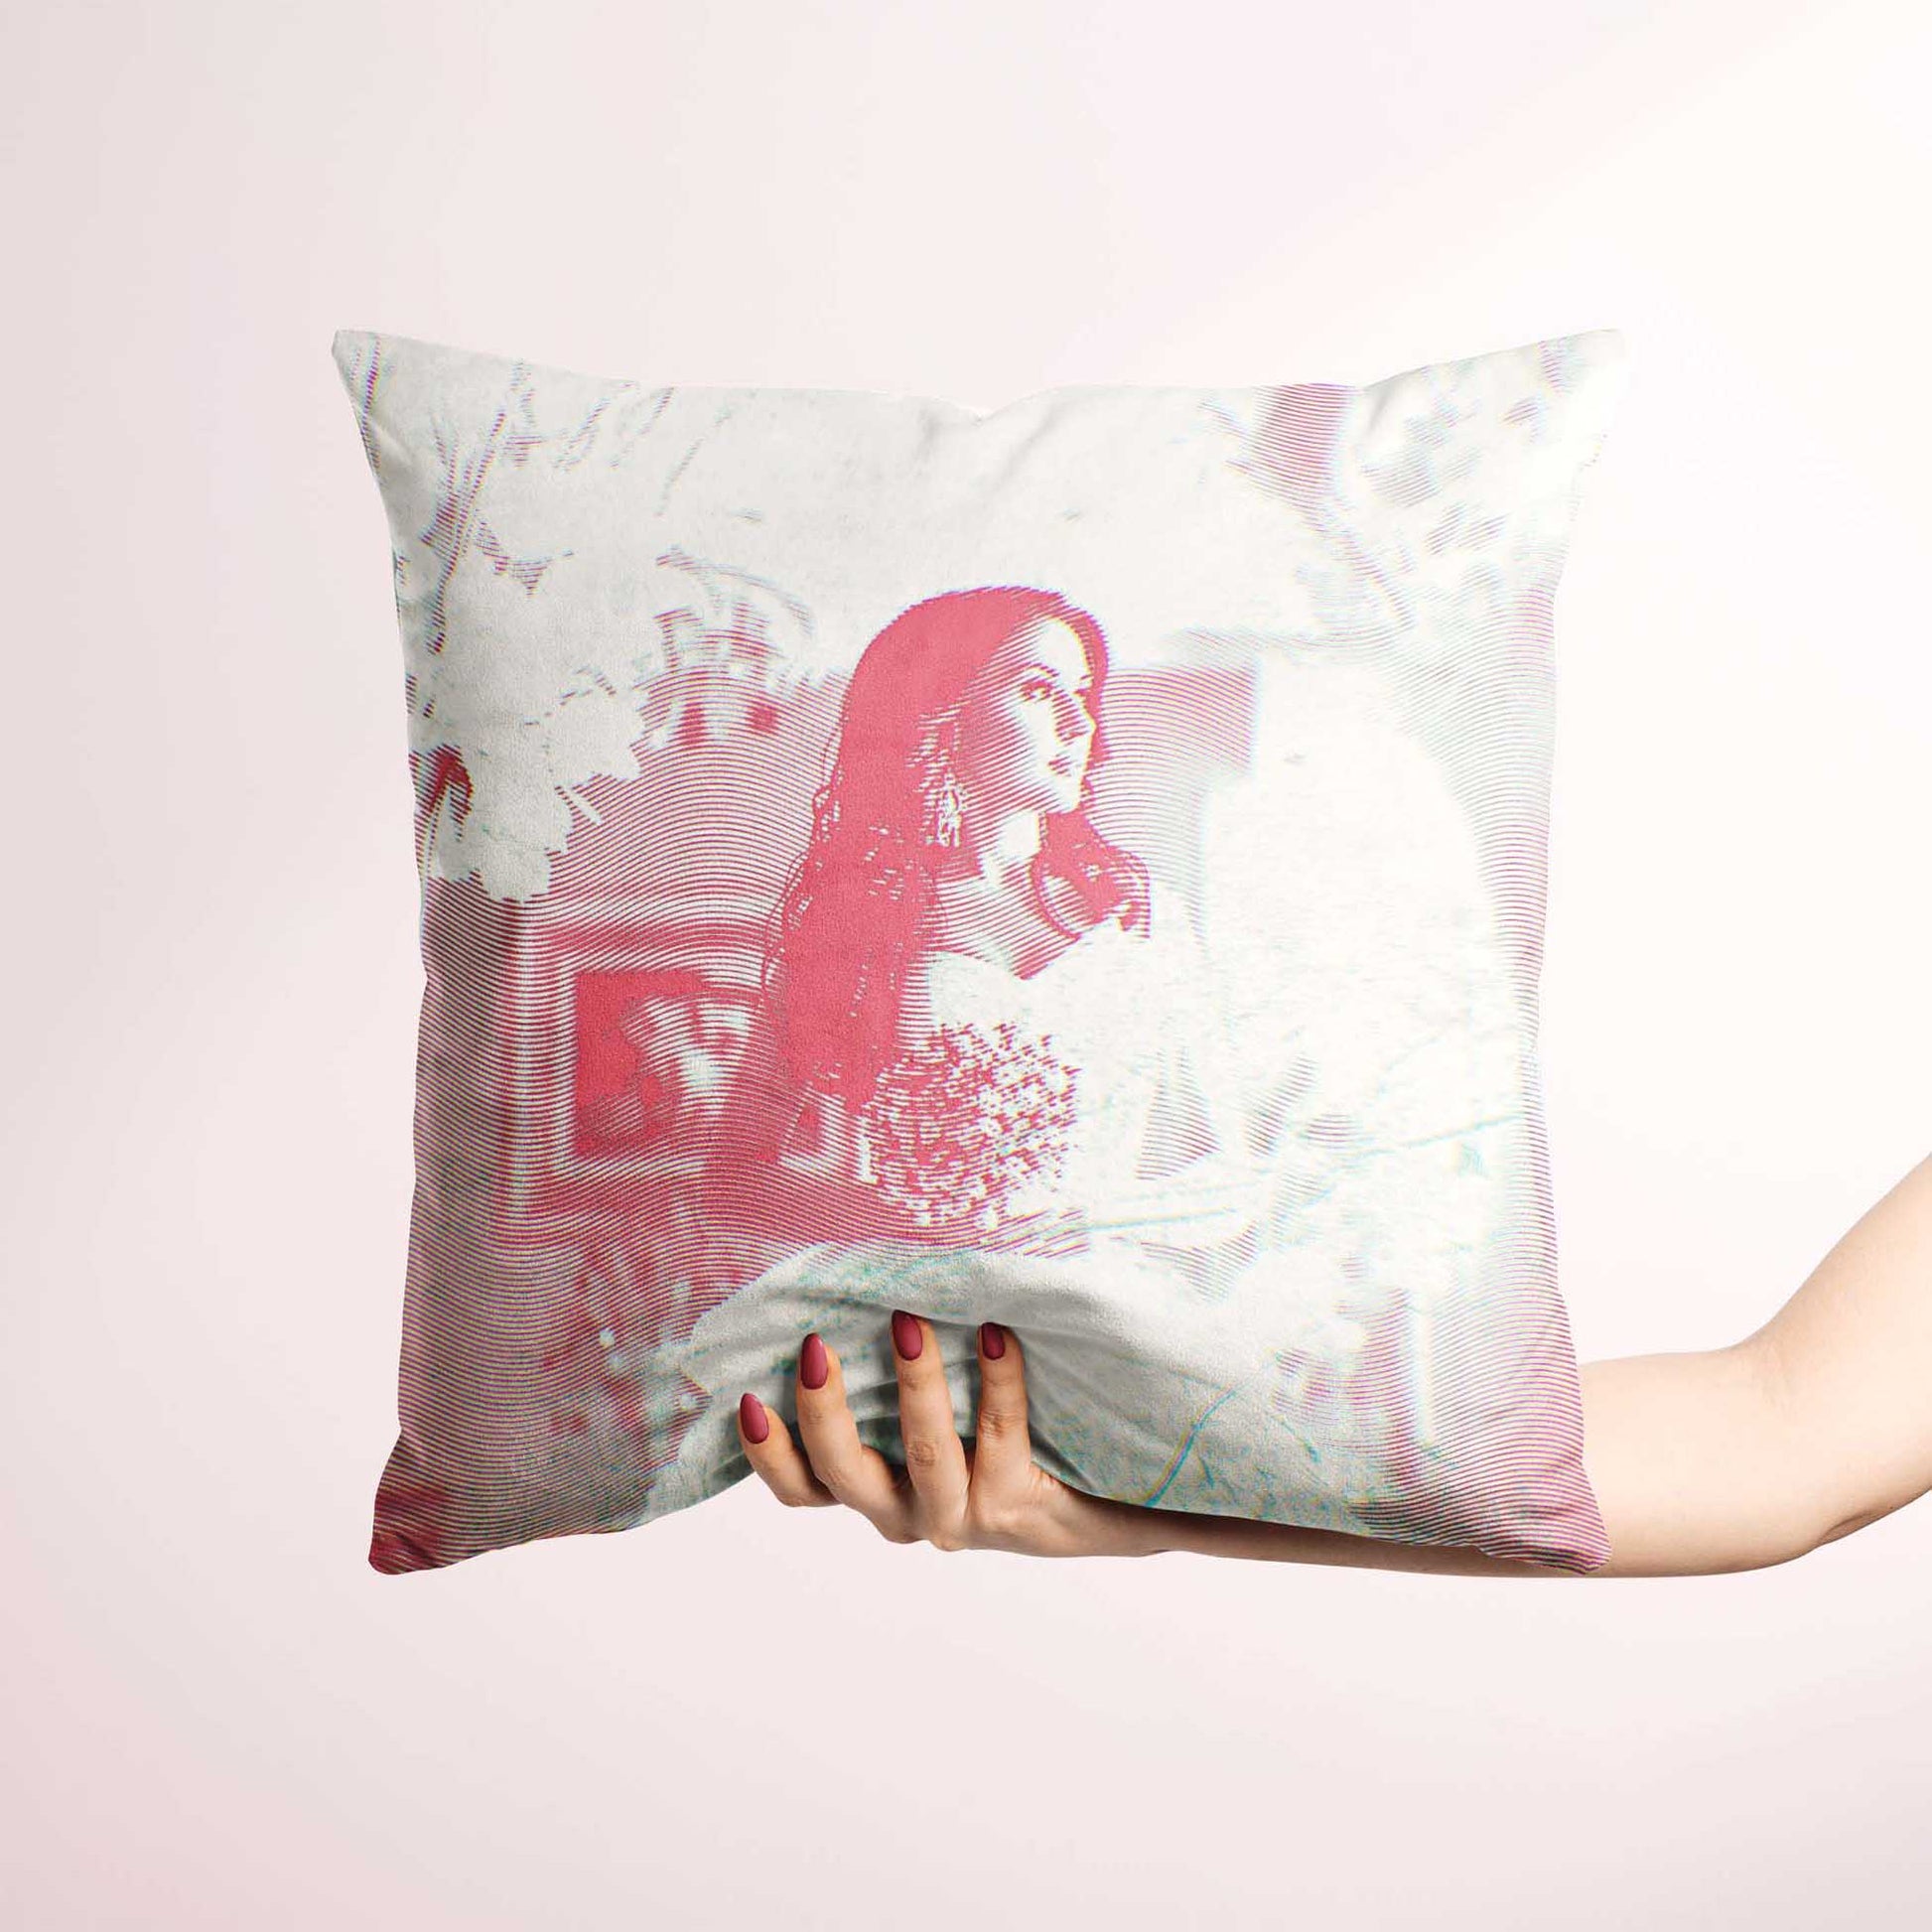 The Personalised Pink Engraving Cushion is the epitome of luxury and originality. With its ability to print from a photo, it allows you to create a truly unique and bespoke design. Made from soft velvet